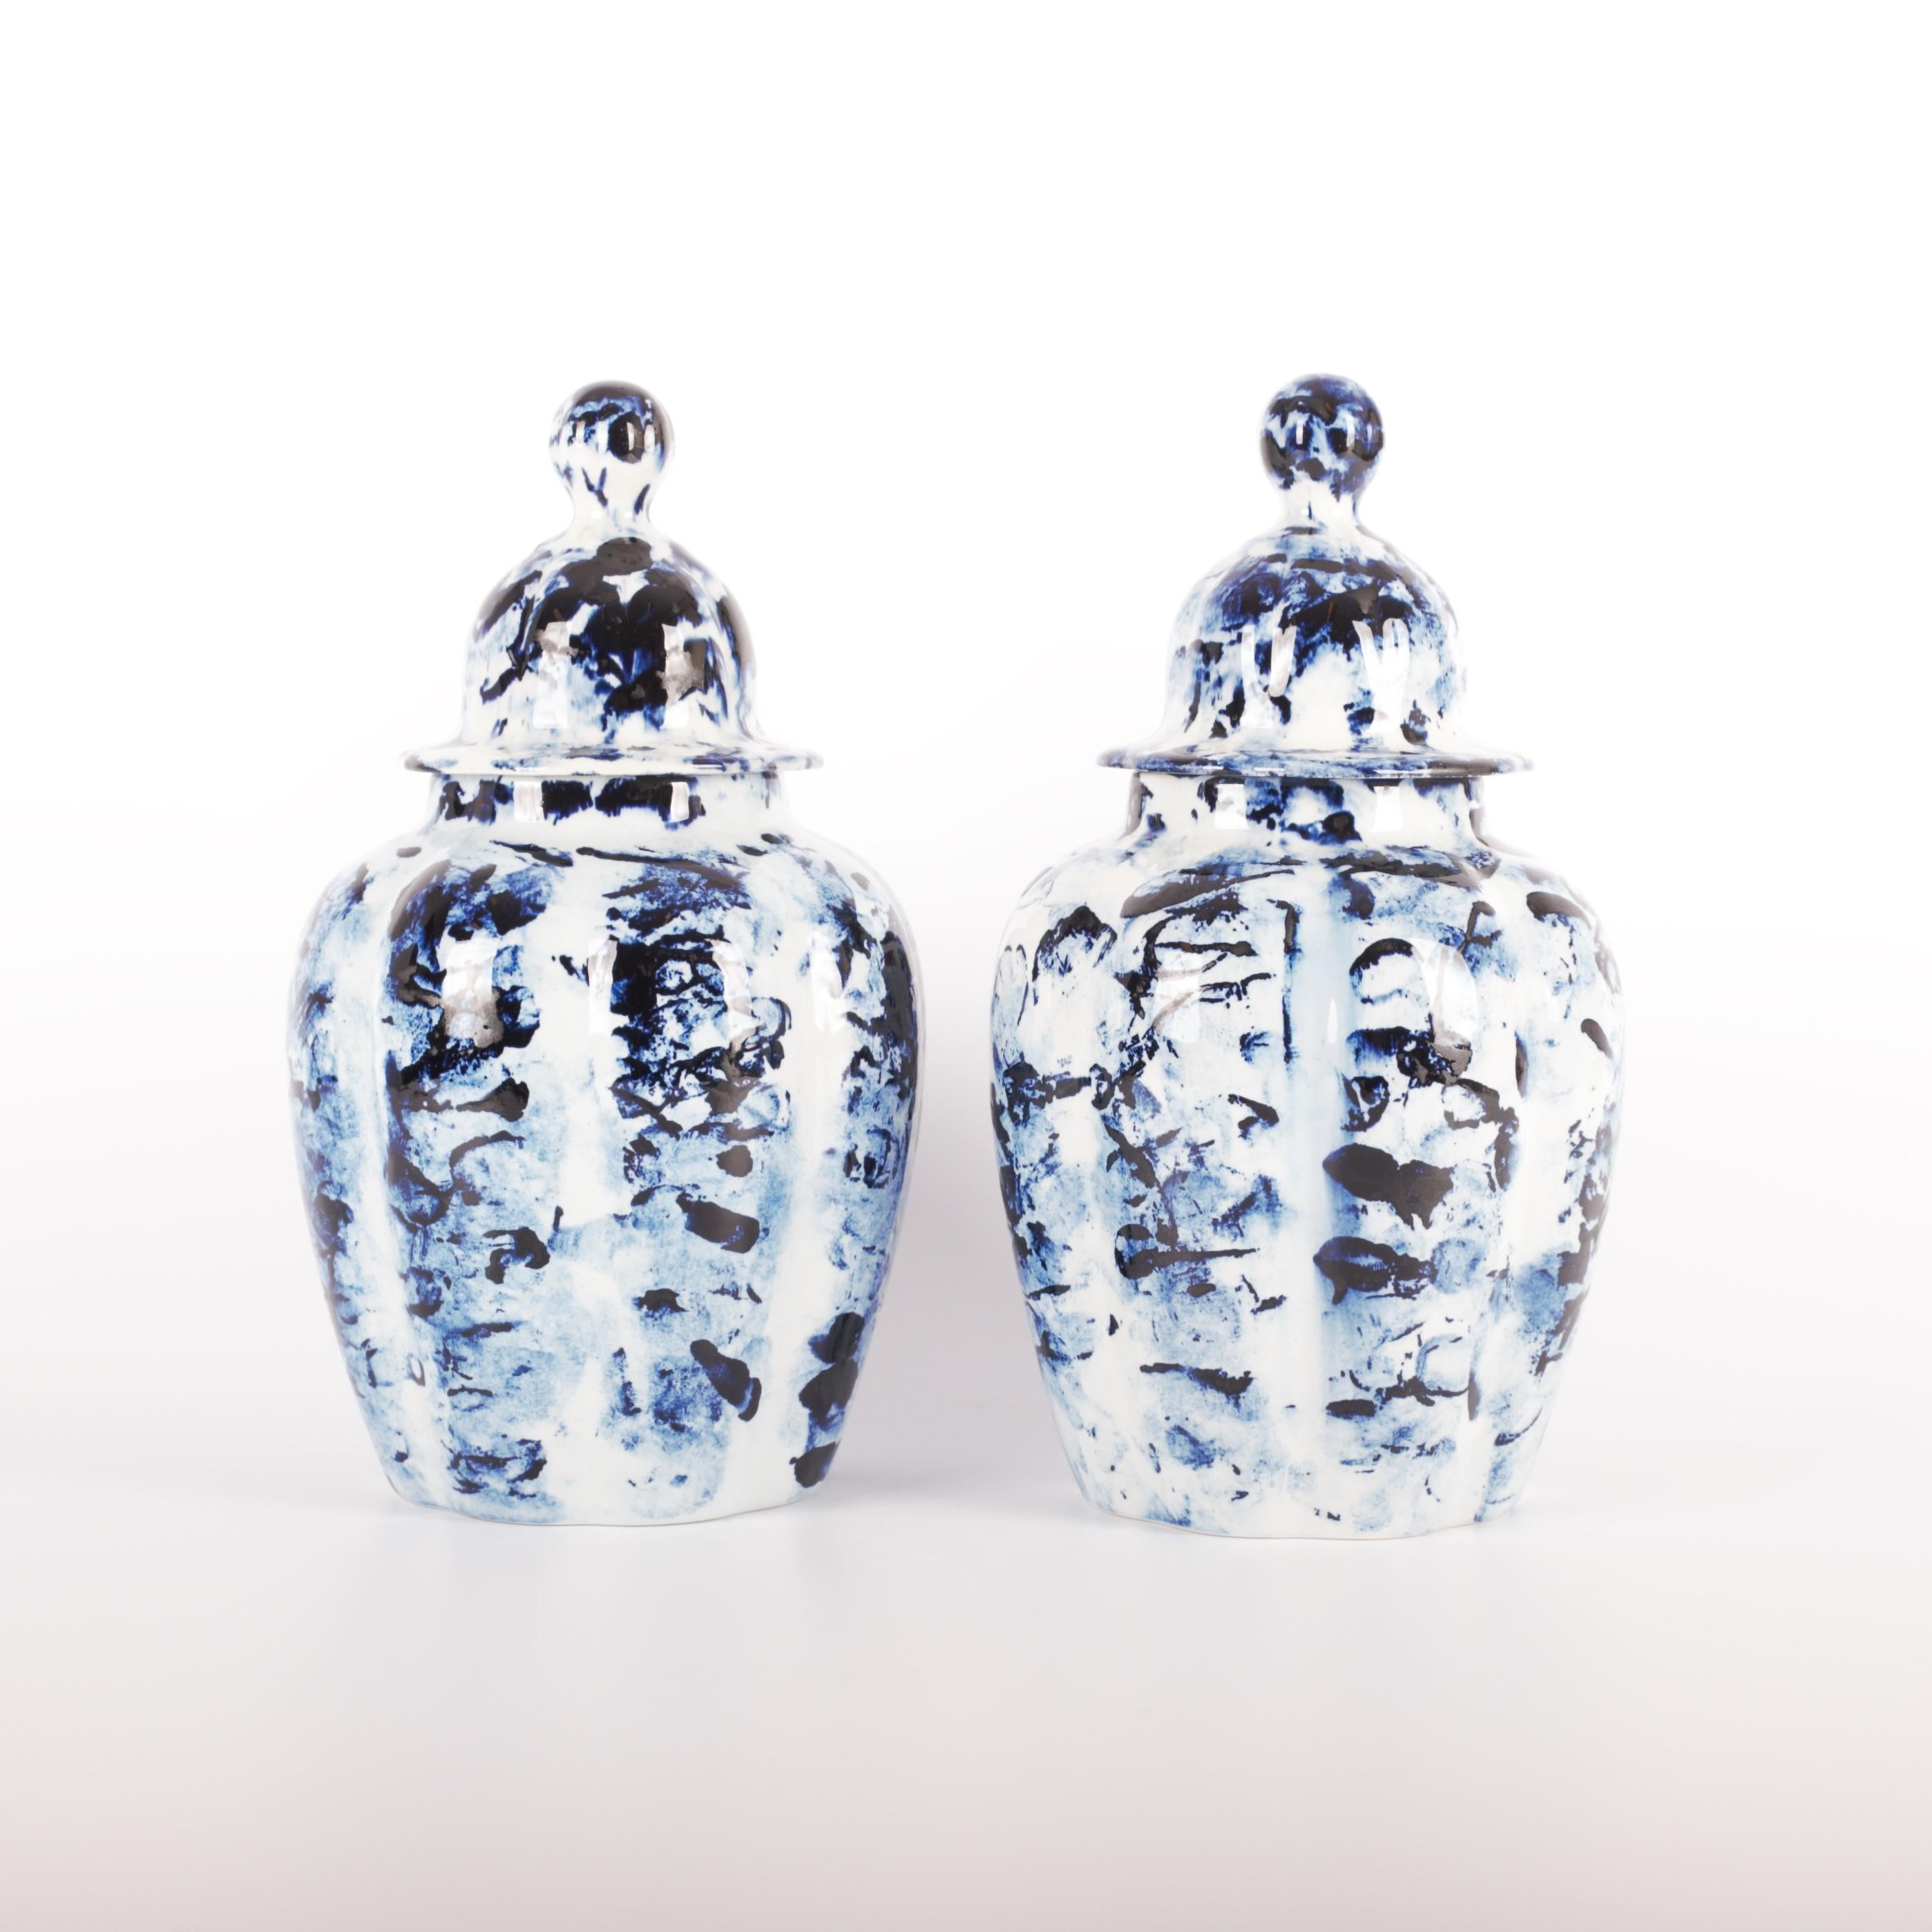 The set of two Delft Blue Vases with Lid (Pul, 30cm high) is available as an exclusive Personal Edition, Marcel Wanders' label carrying works of a more personal and experimental nature. The pieces of the Delft Blue series are unlimited unique by